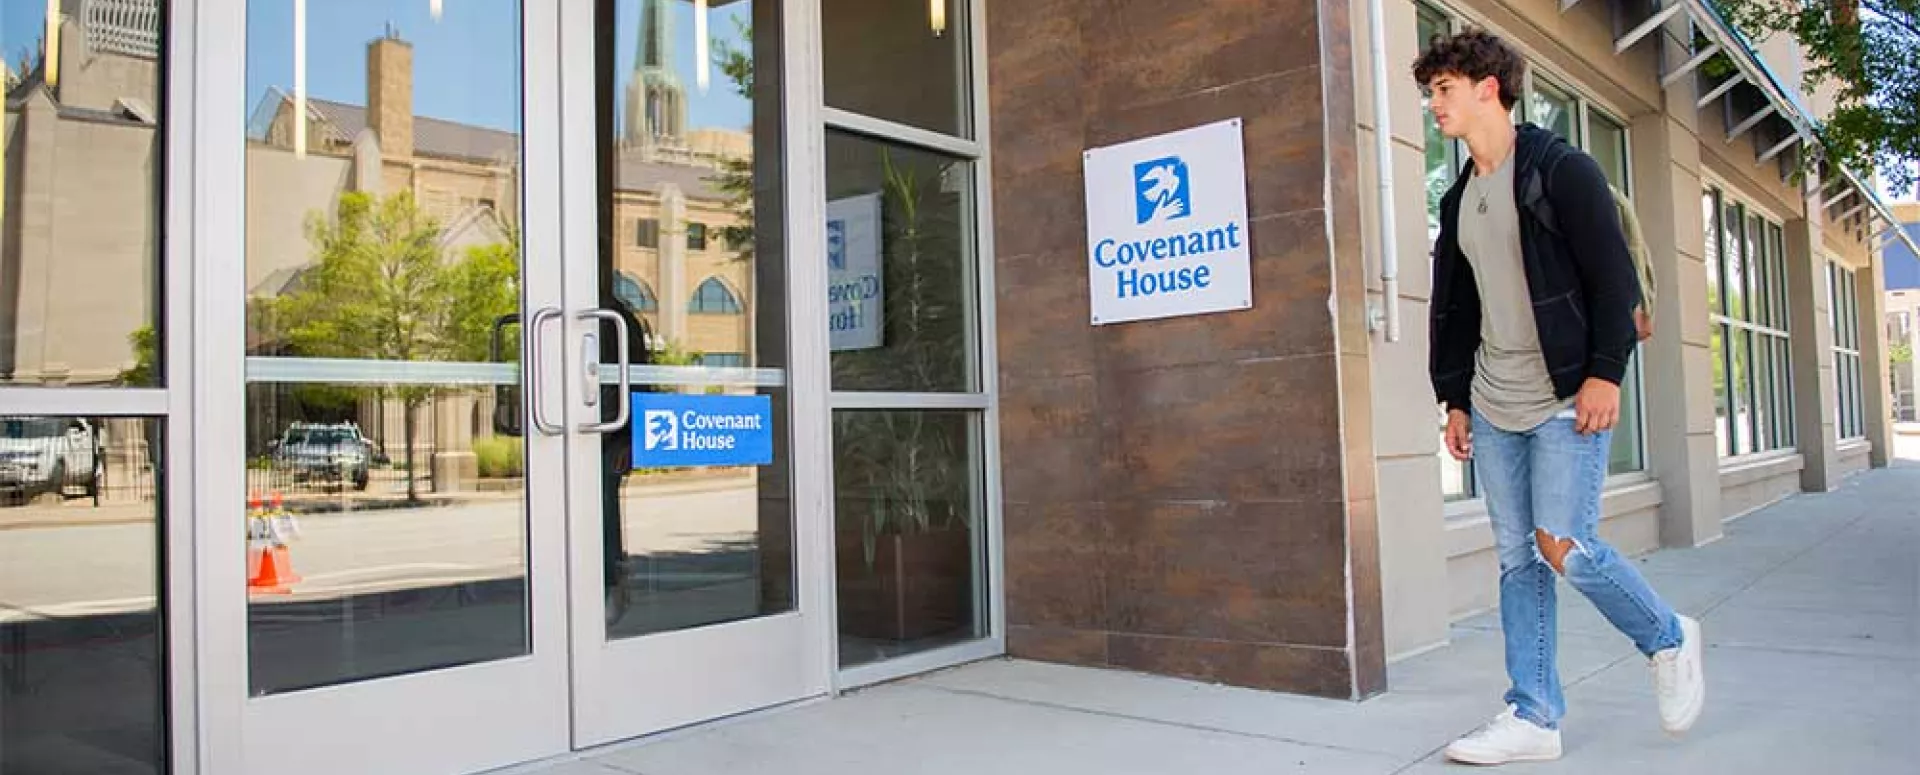 teen entering covenant house youth crisis center